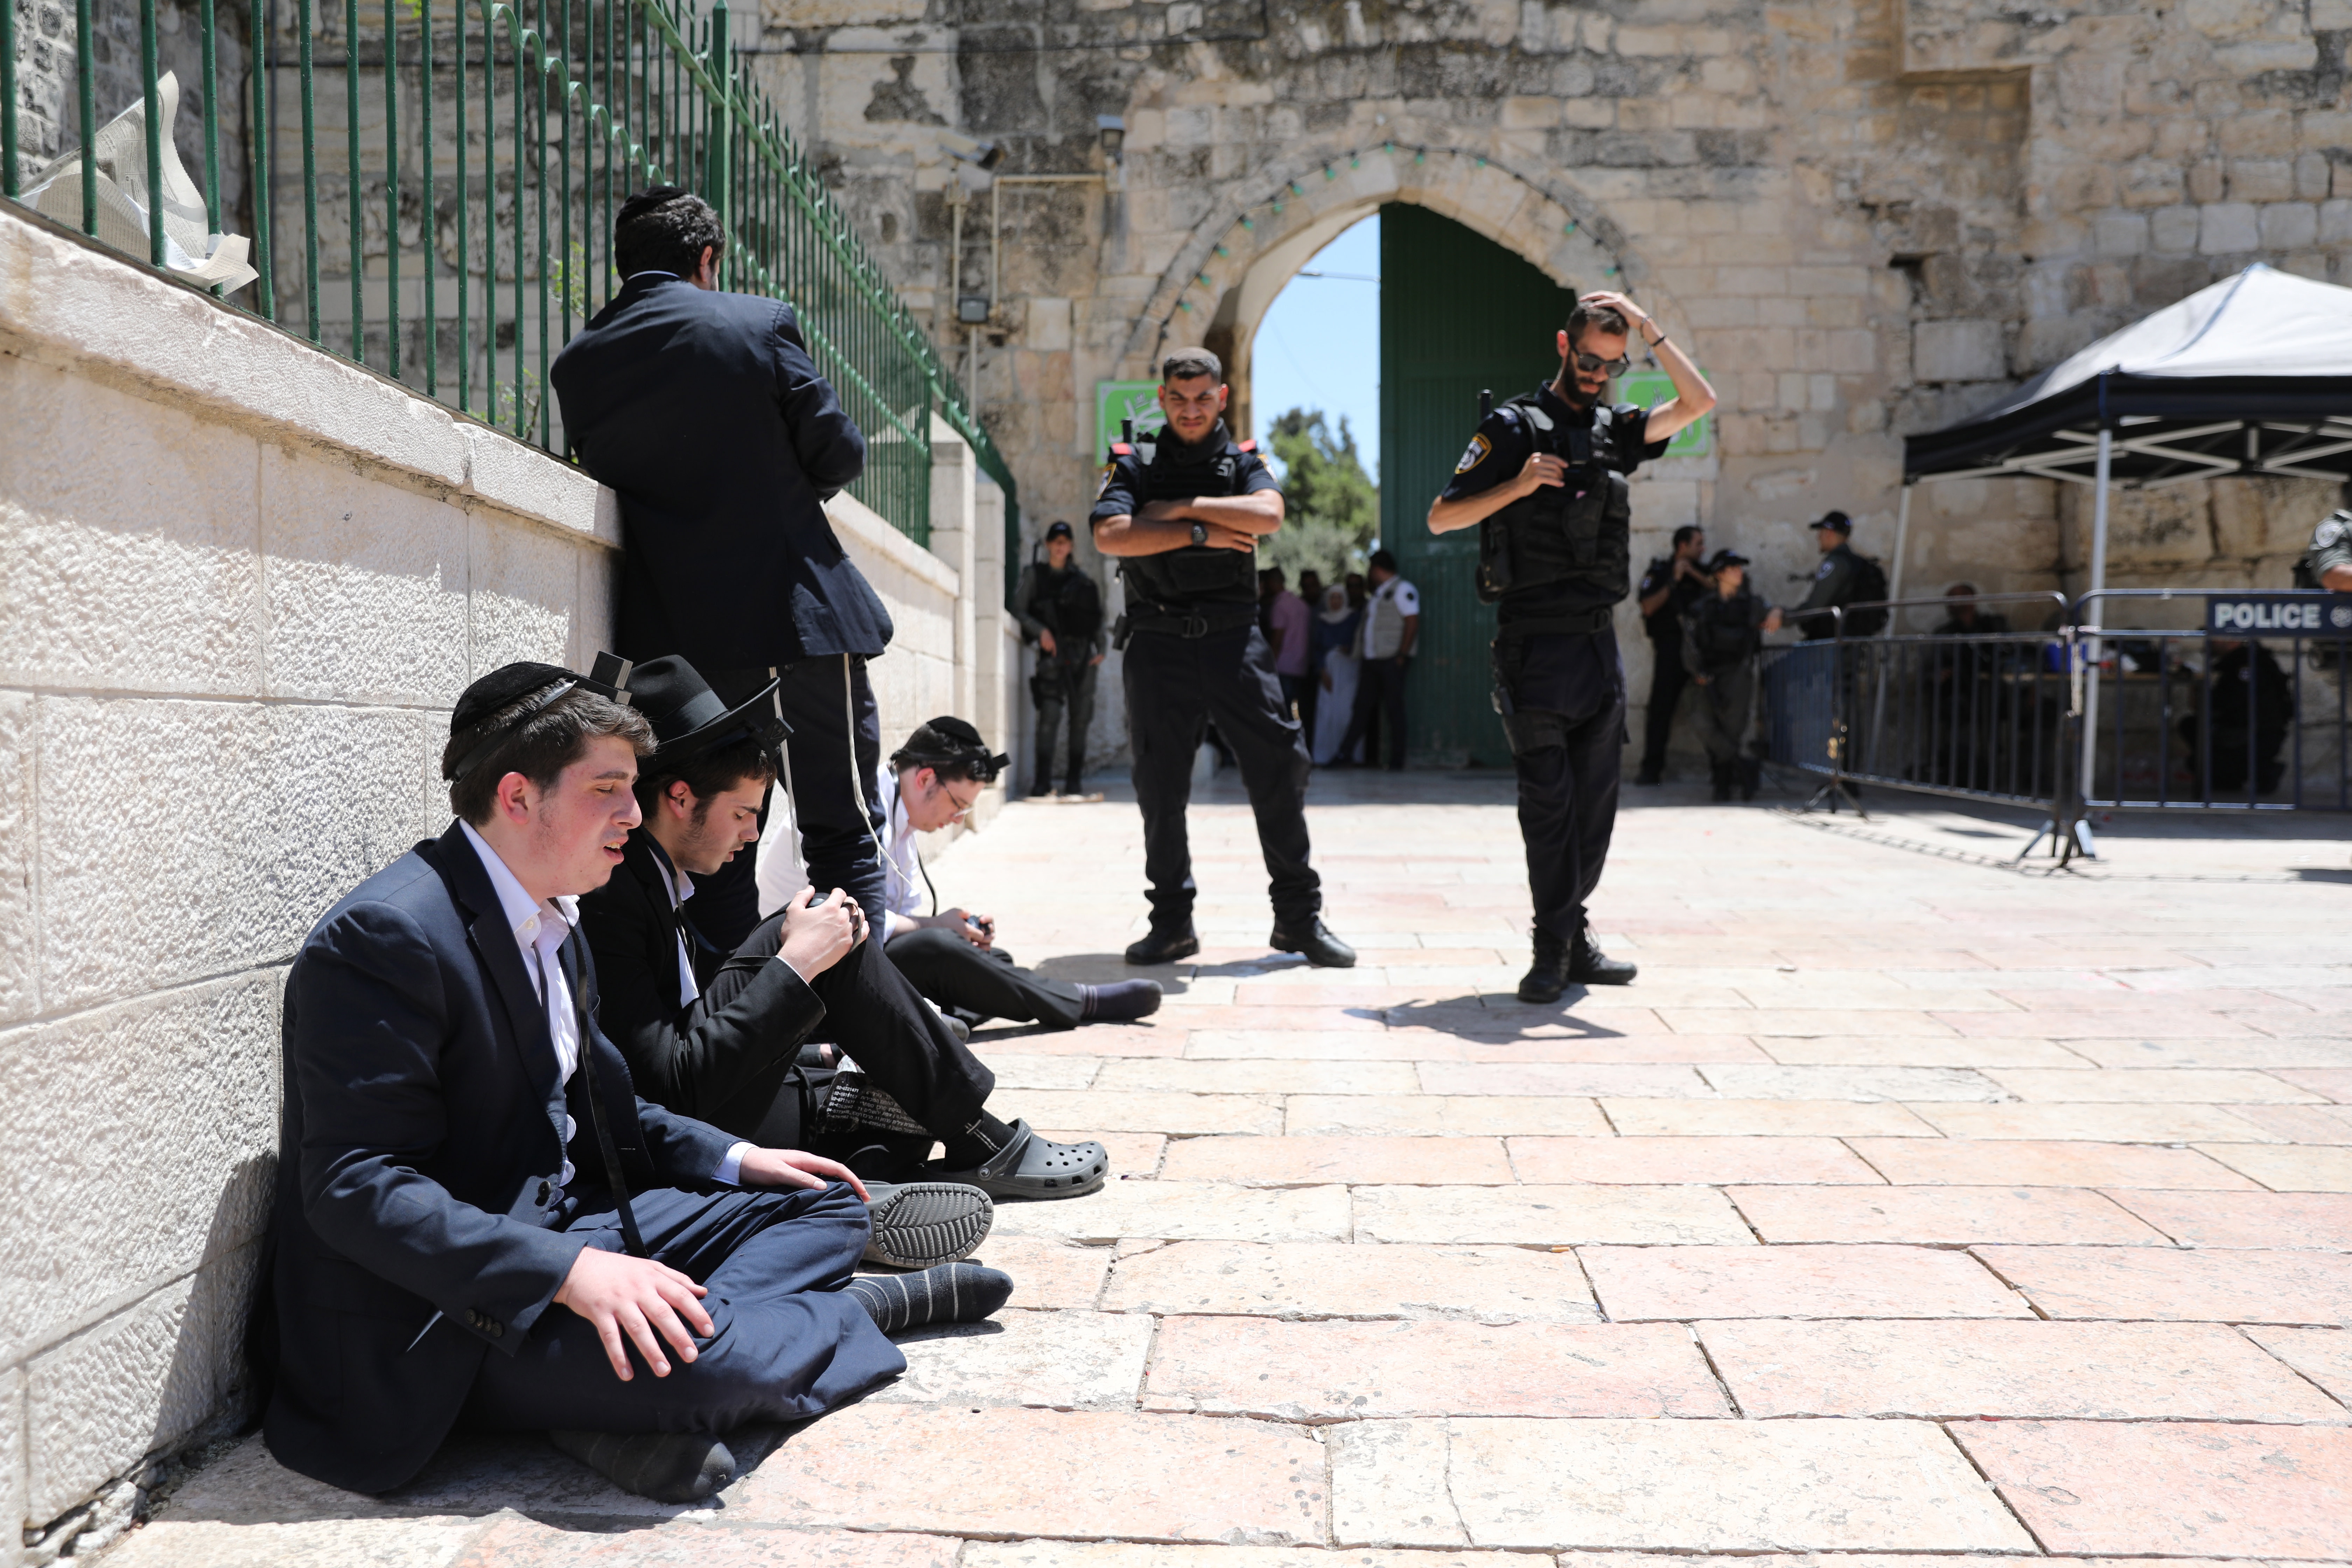 epa07767996 Orthodox Jews perform a prayer near the lion gate at the entrance to the Al Aqsa Mosque compound as they mark Tisha B'av in the old city of Jerusalem, 11 August 2019. Media reports tension increased at Temple Mount after Israeli police allowed entry of Jews during the annual fast day in Judaism Tisha B'Av while thousands of Muslim worshipers were marking the Eid al Adha holiday. Palestinian sources reported 14 people were injured during clashes, while police said four police officers were injured.  EPA/ABIR SULTAN